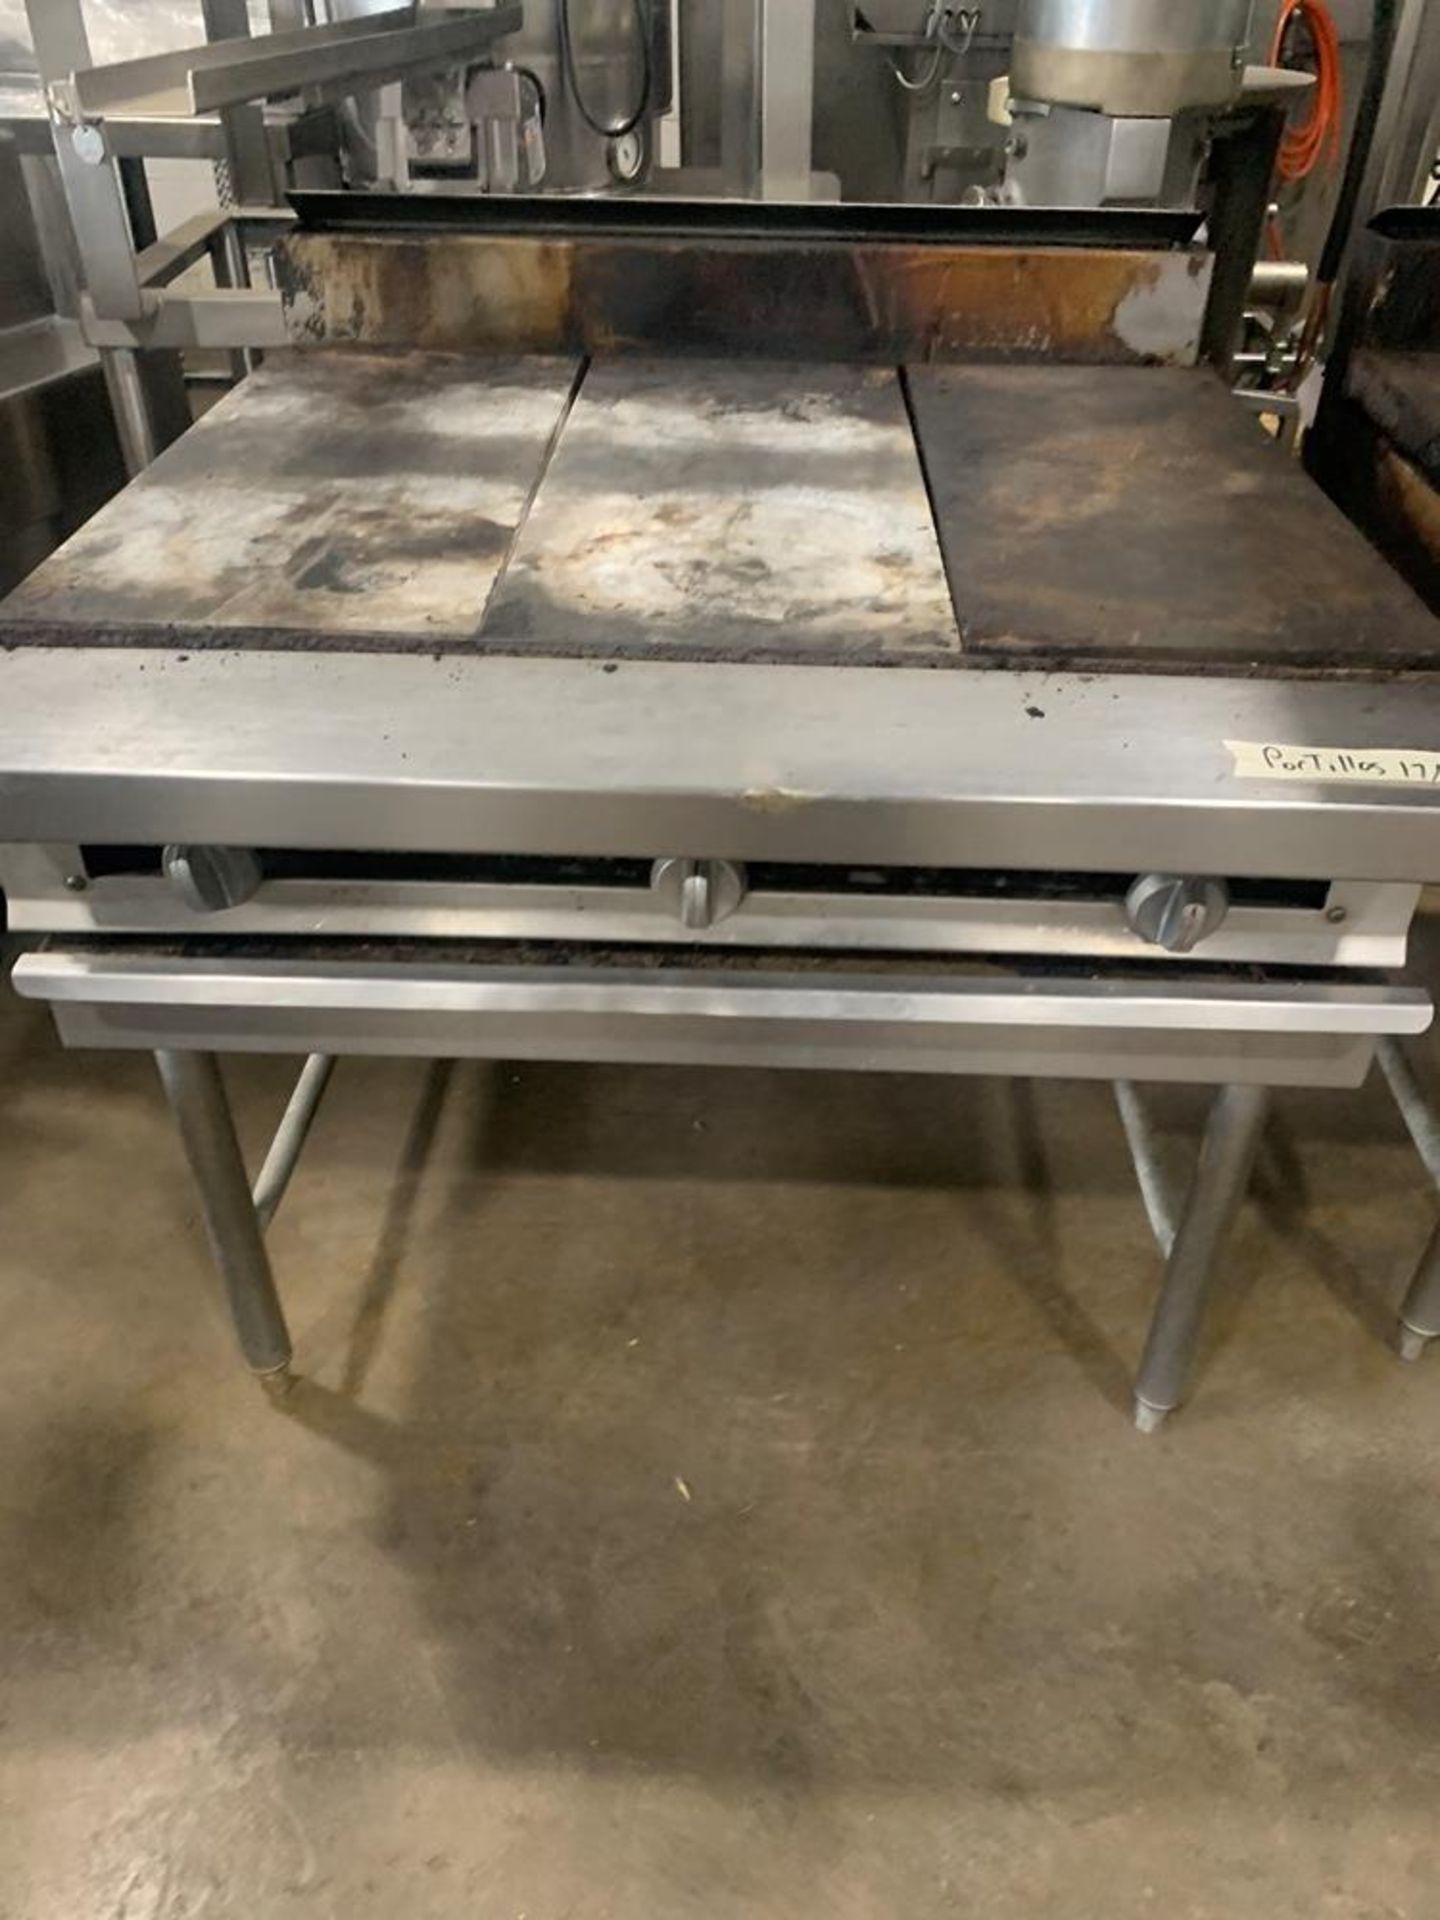 Blodgett 3-Burner Grills, 36" X 28" top, natural gas (Located in Plano, IL) - Image 2 of 5